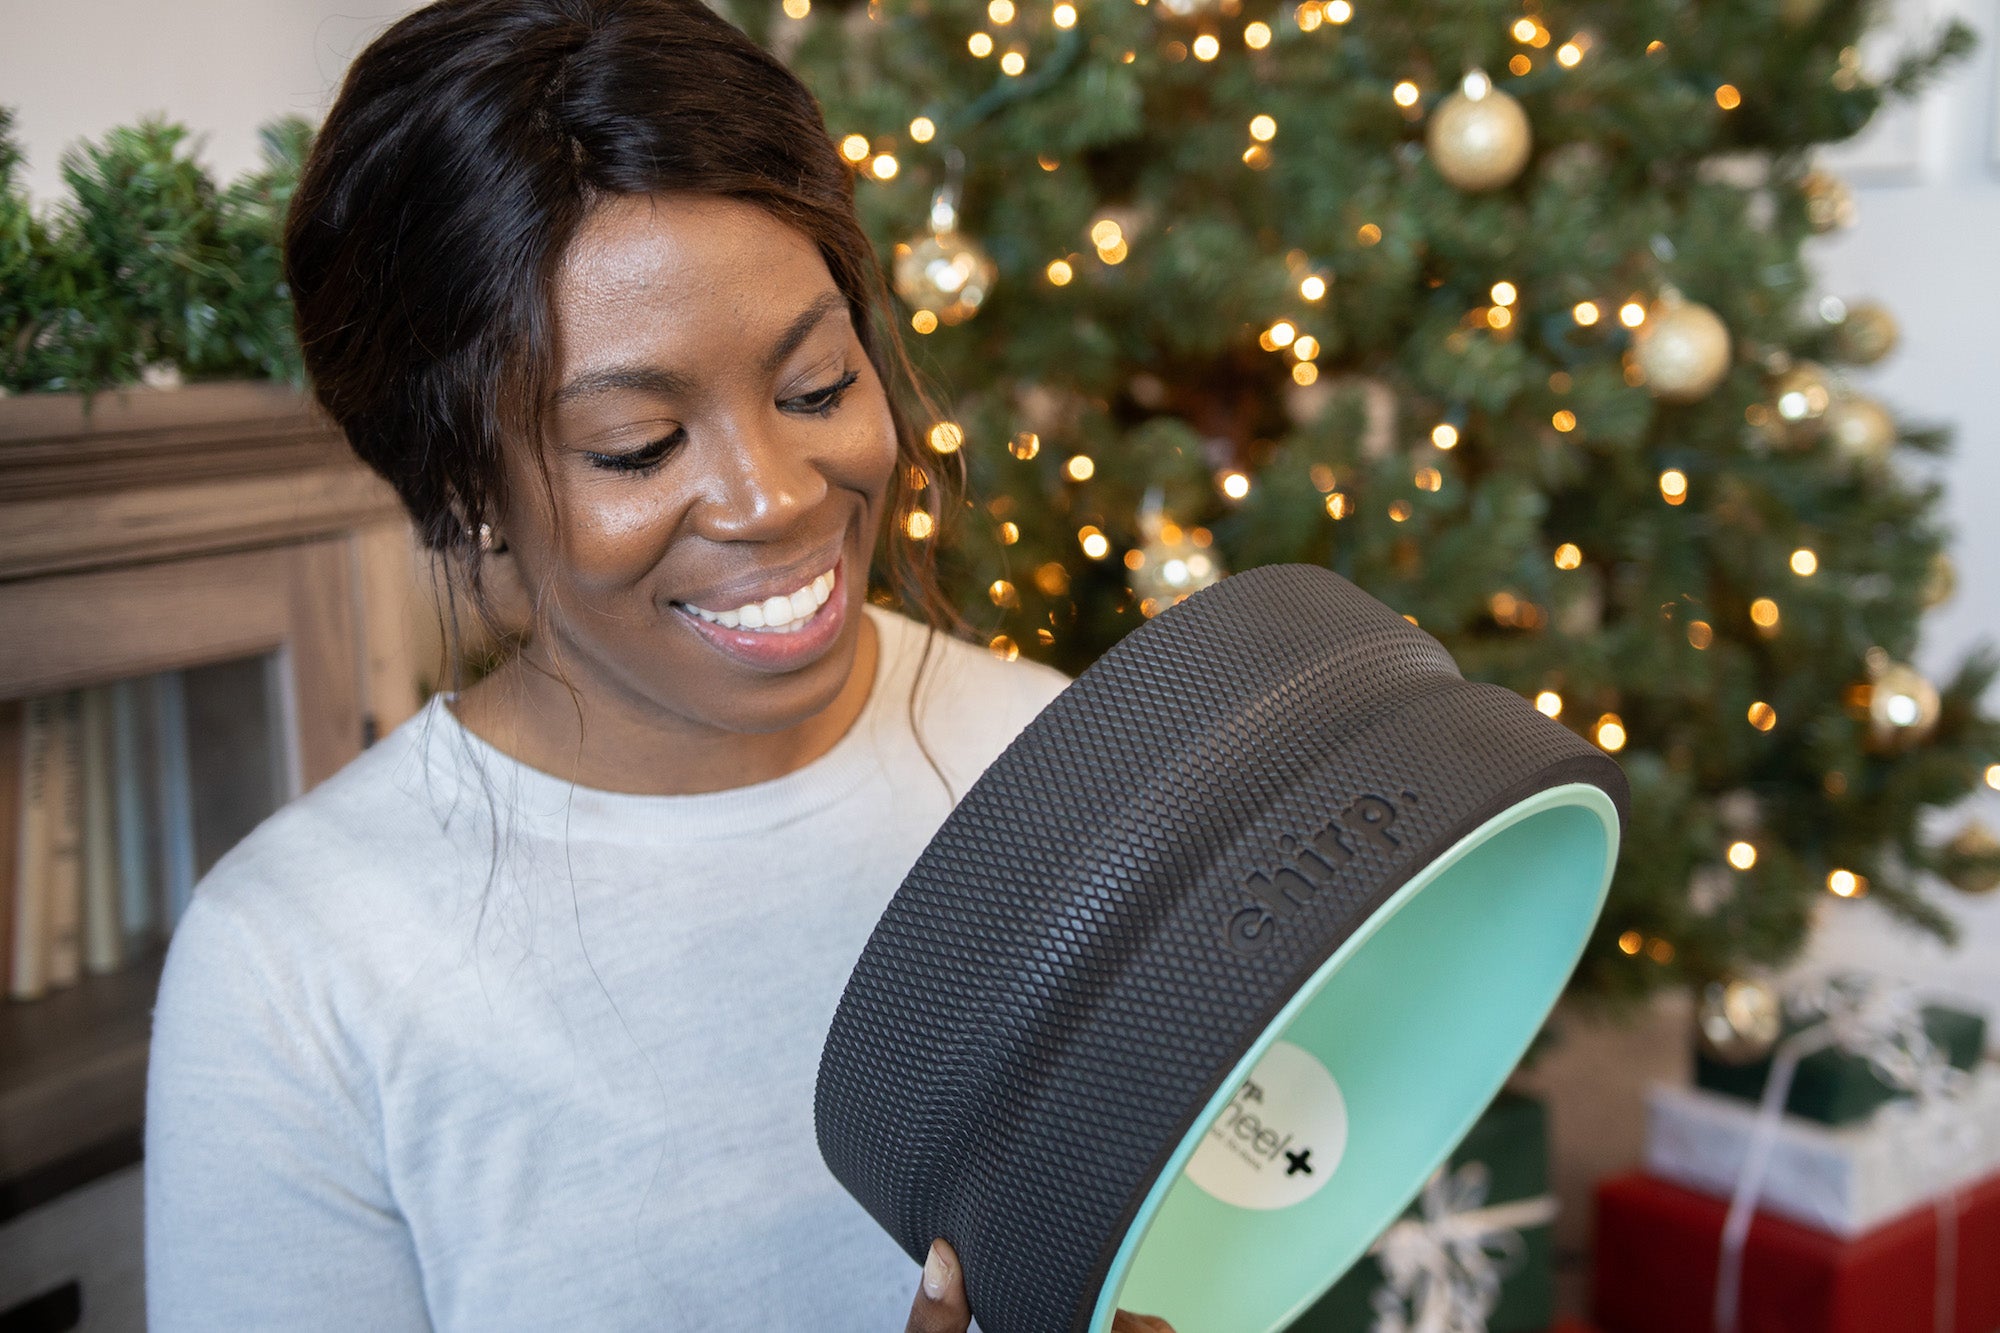 You Got a Chirp Wheel for Christmas. Now What?